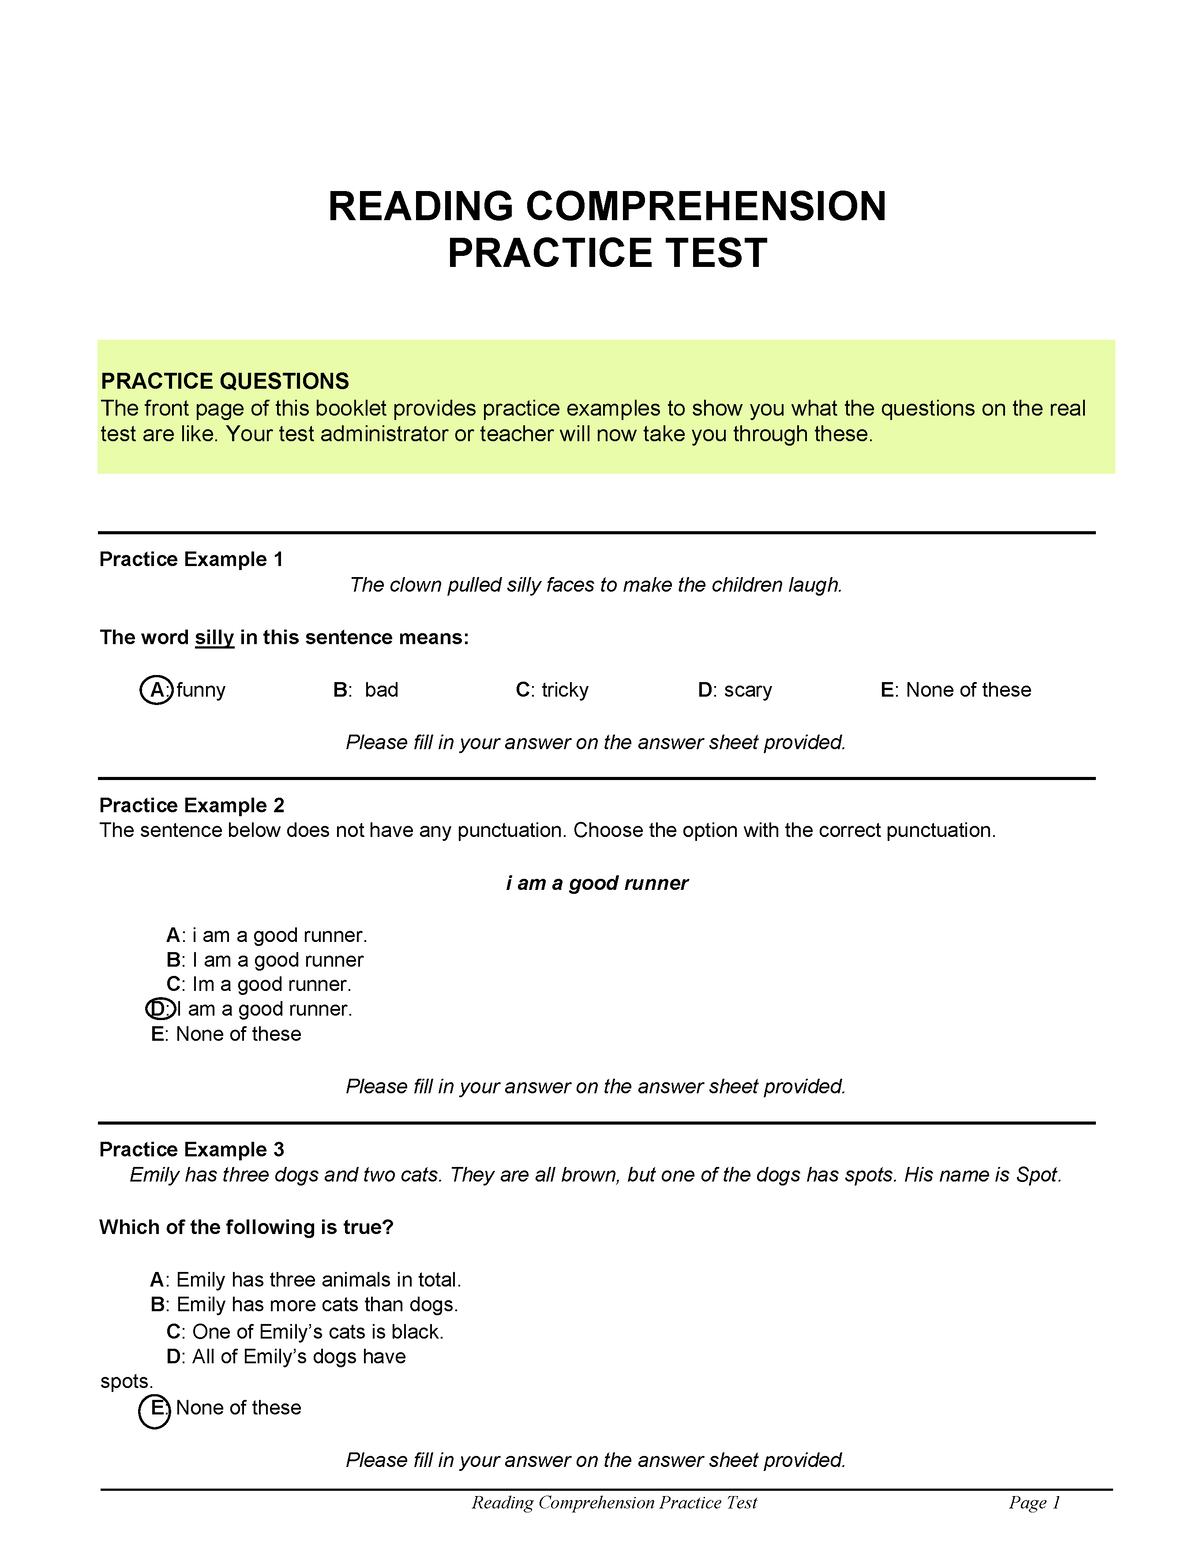 Reading Comprehension Practice Test Answers